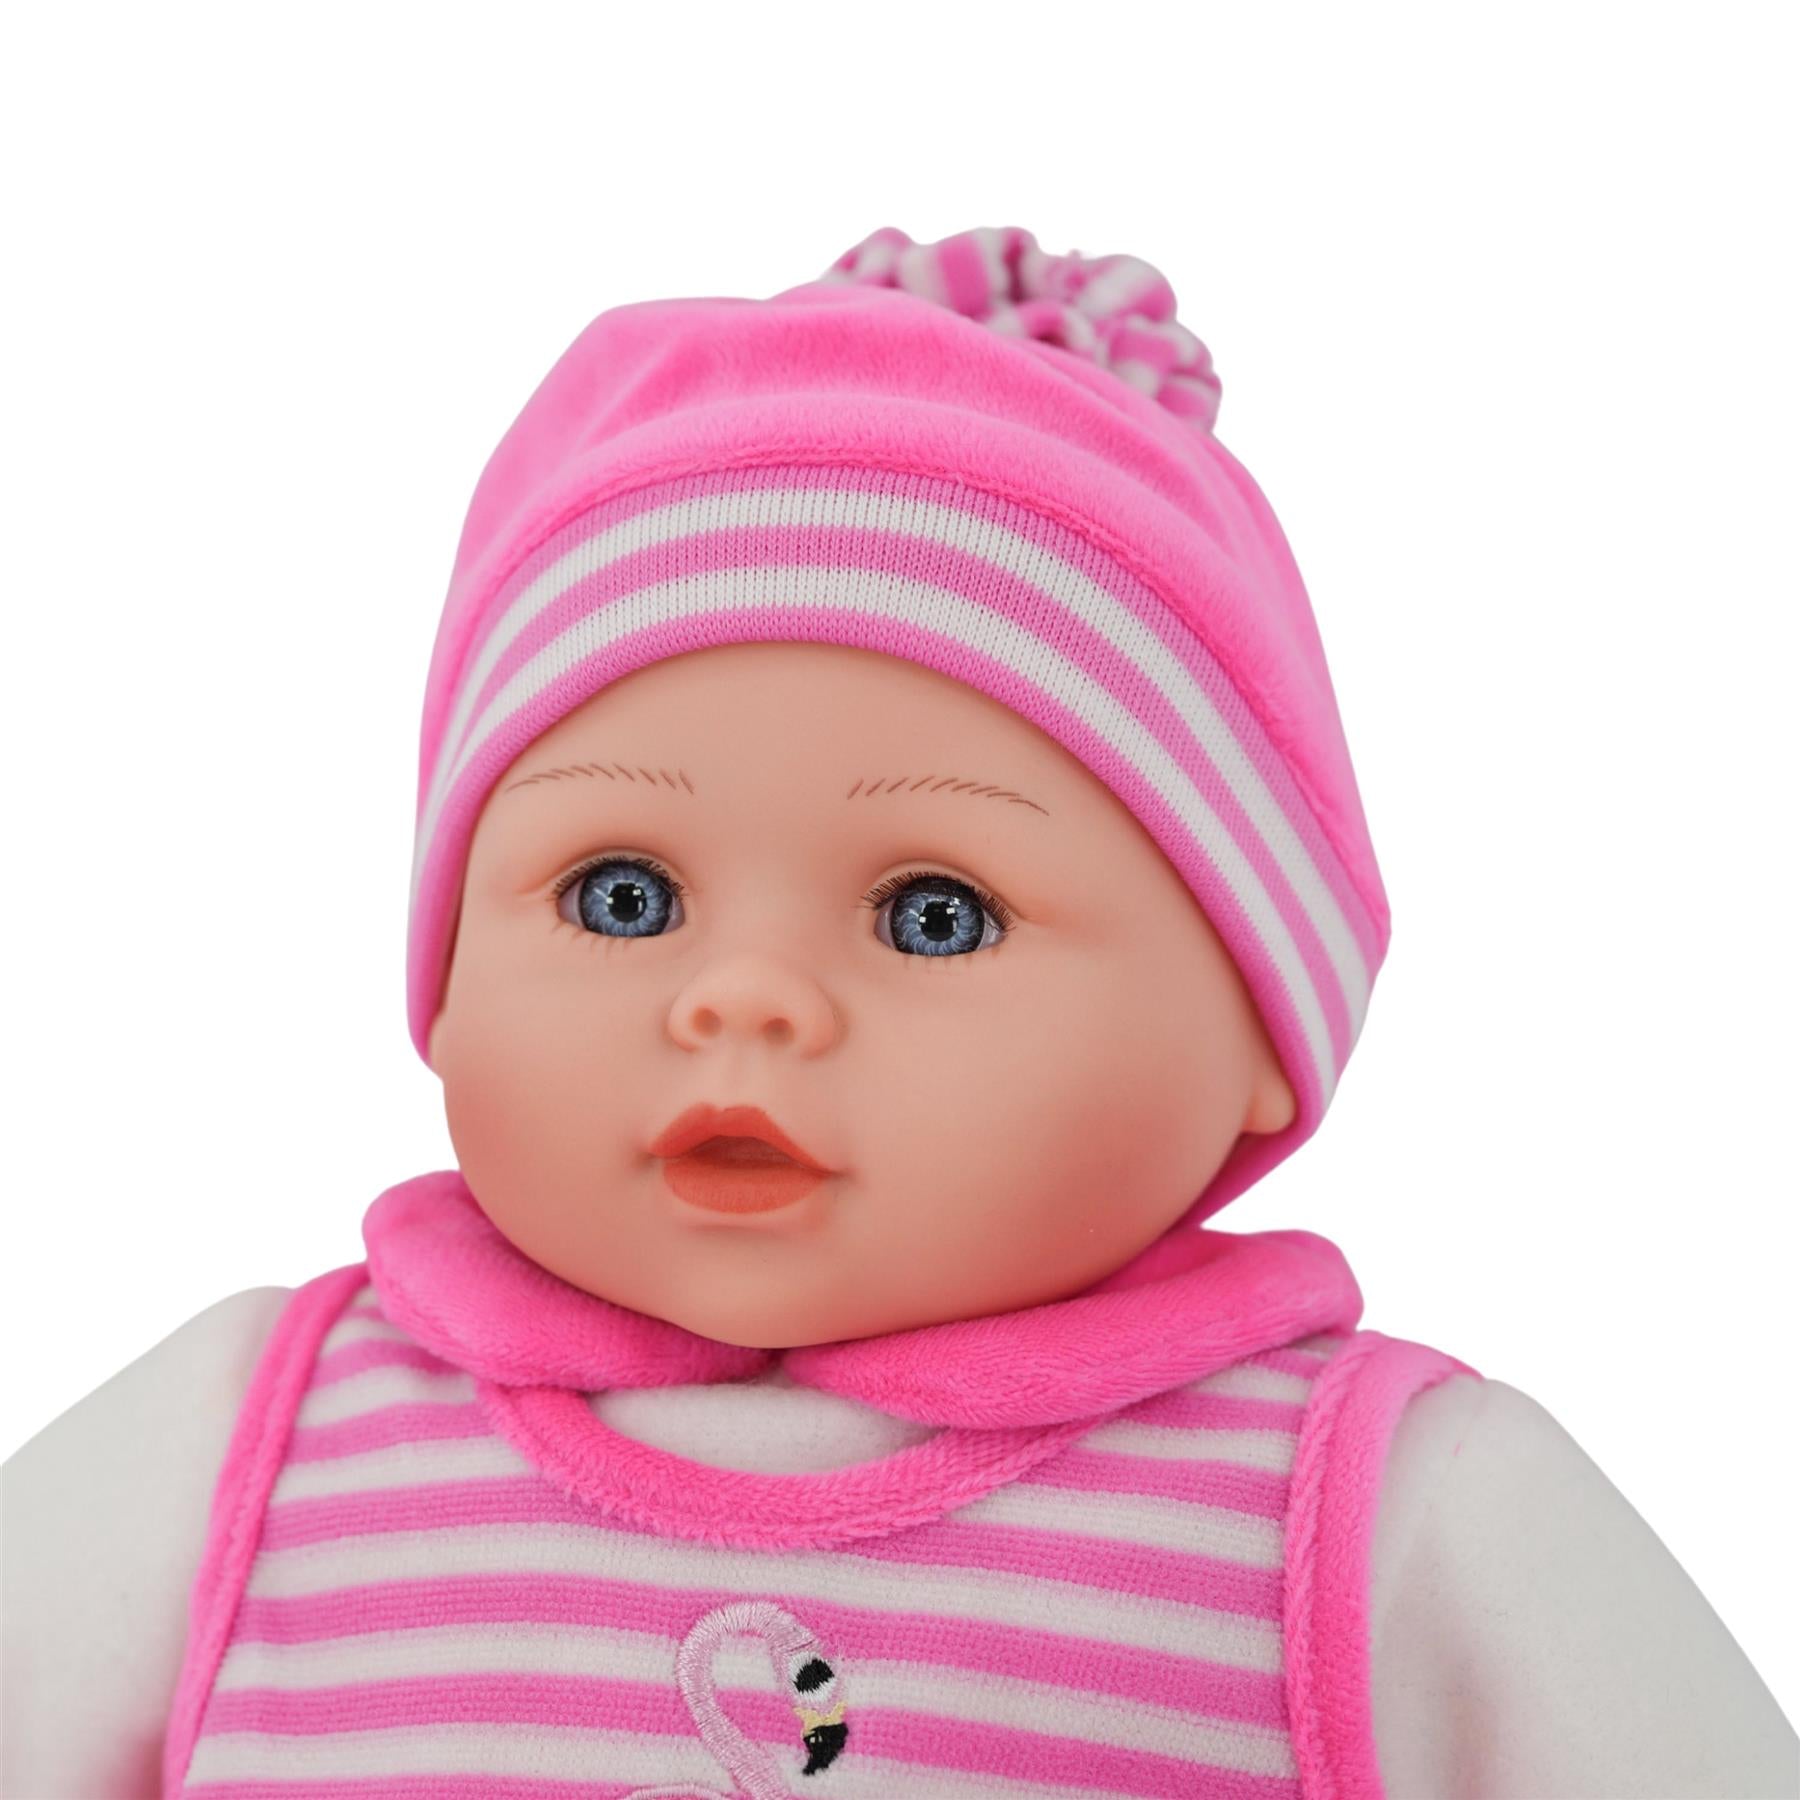 16” Baby Girl Doll With Extra Boy Outfit,Sounds,Feeding Set & Magic Bottle by BiBi Doll - The Magic Toy Shop